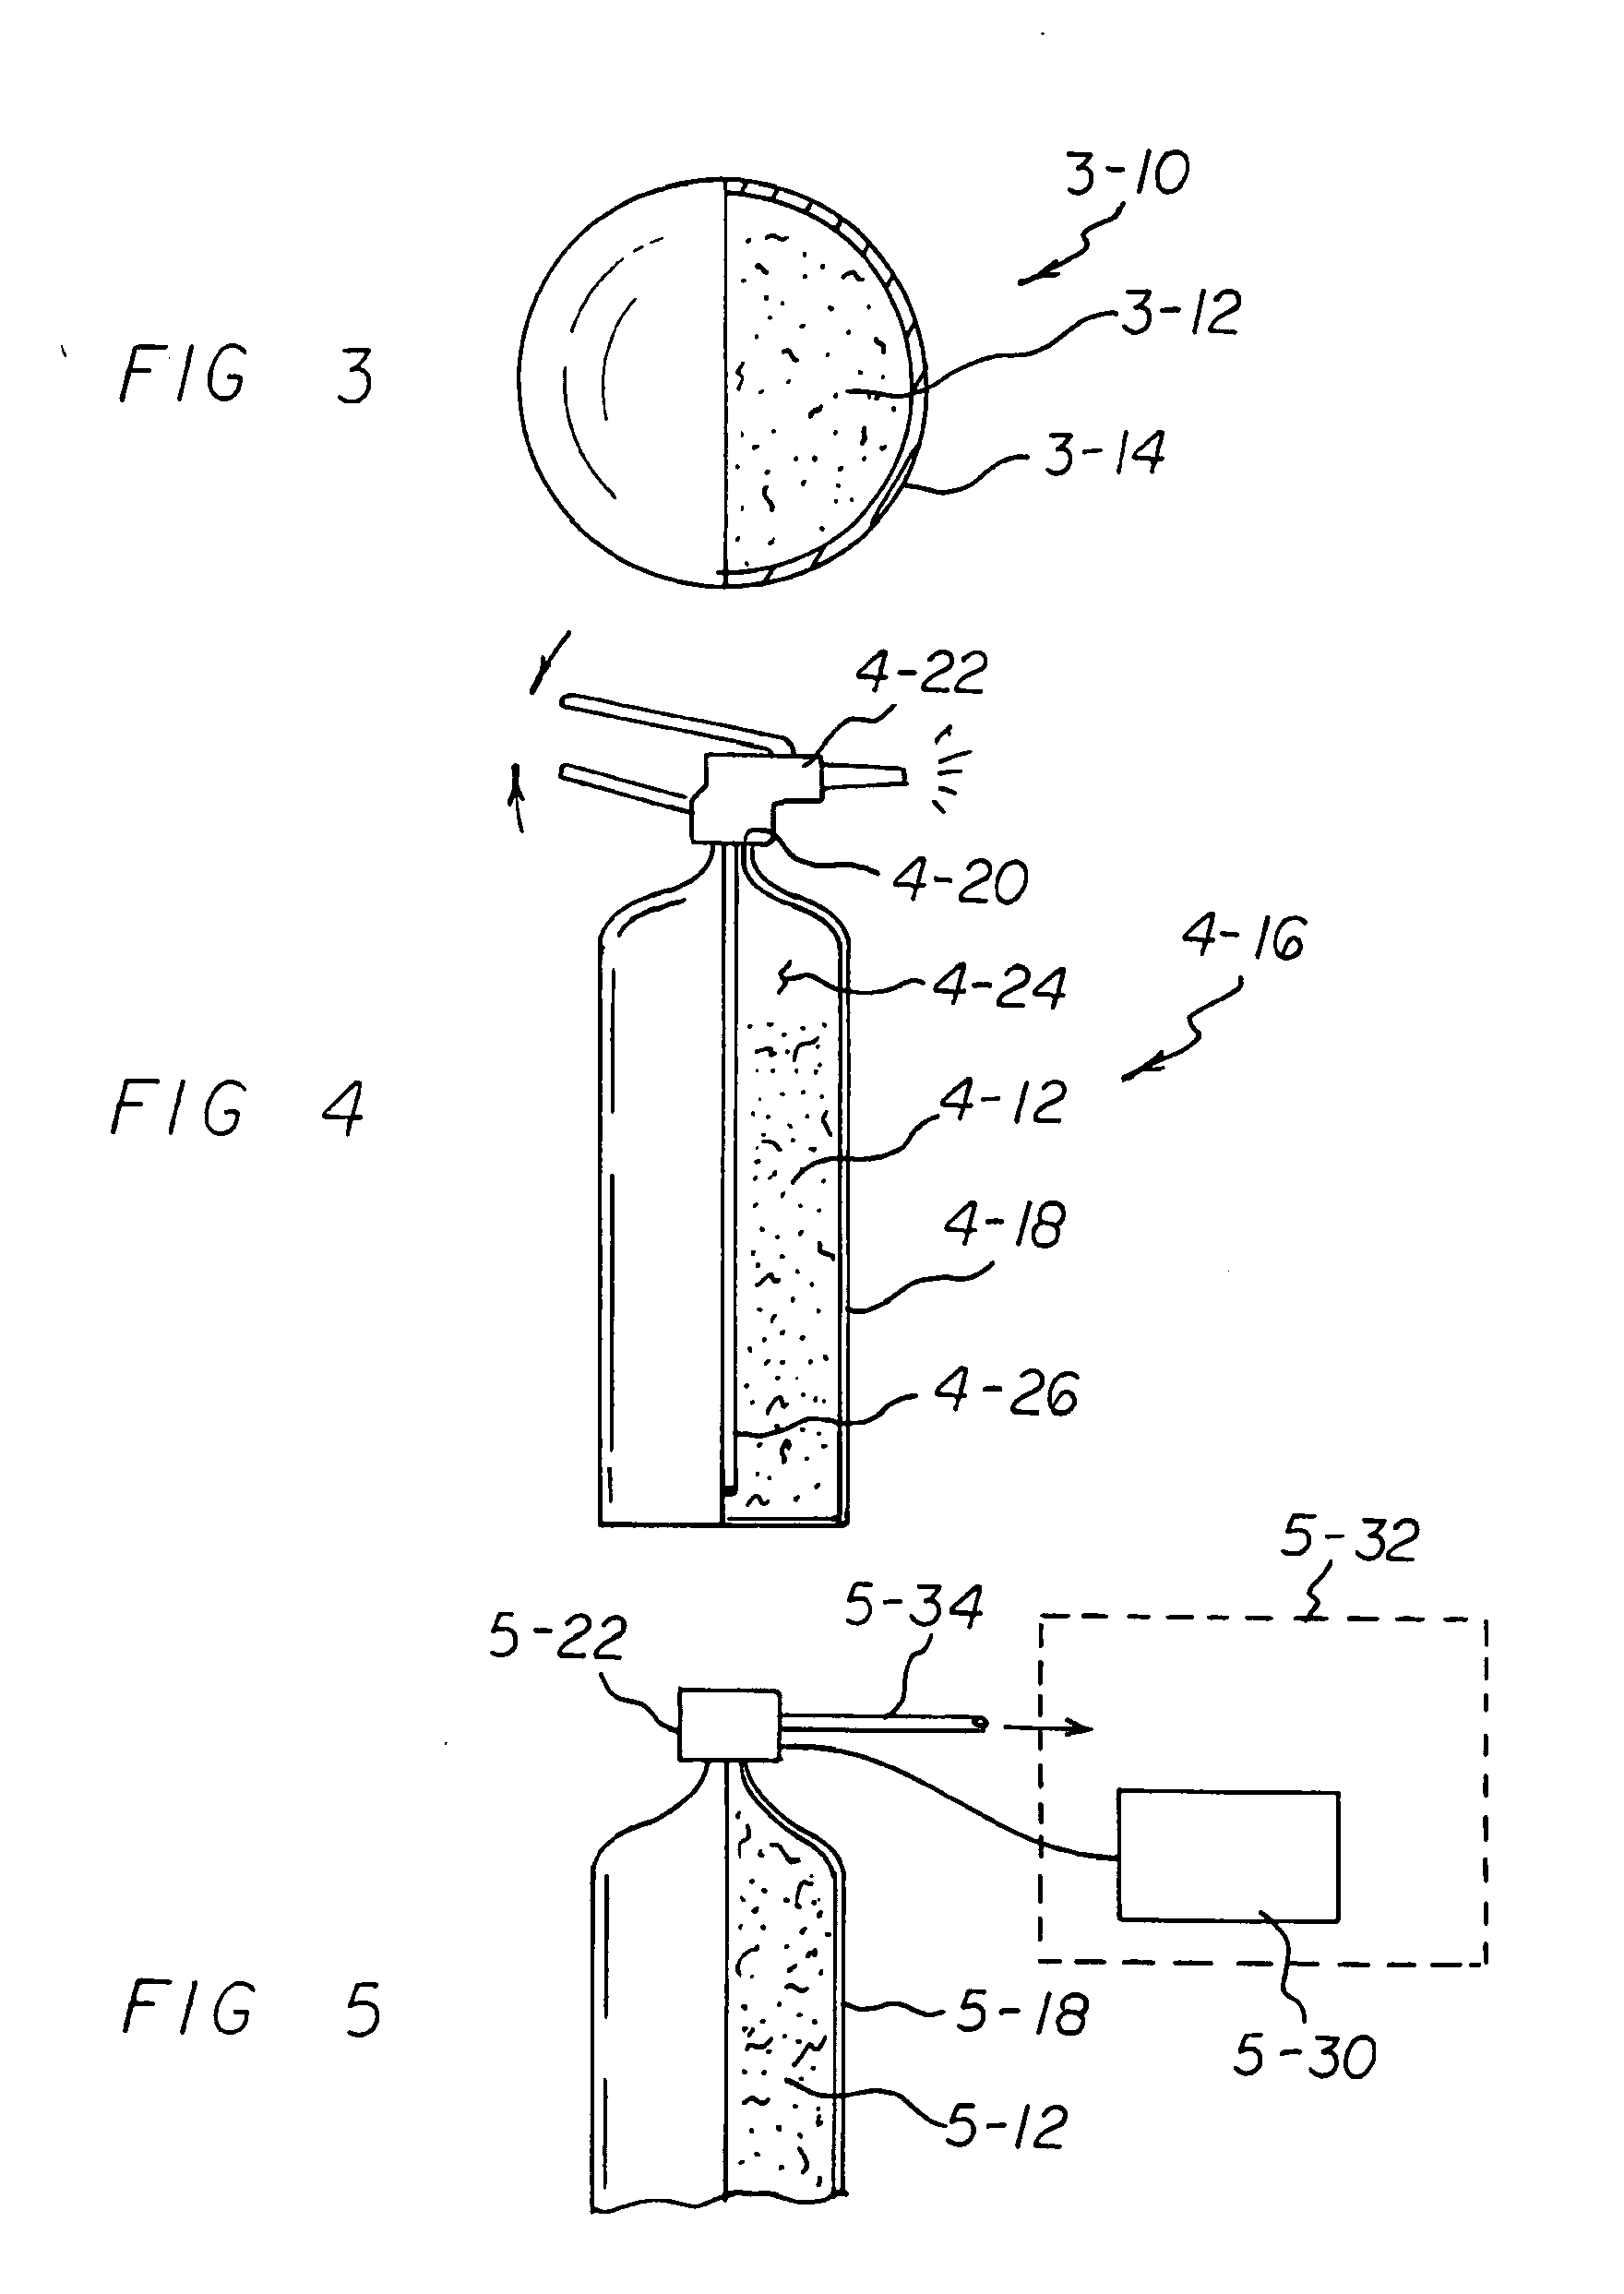 Apparatus and Method for Using Tetrazine-Based Energetic Material